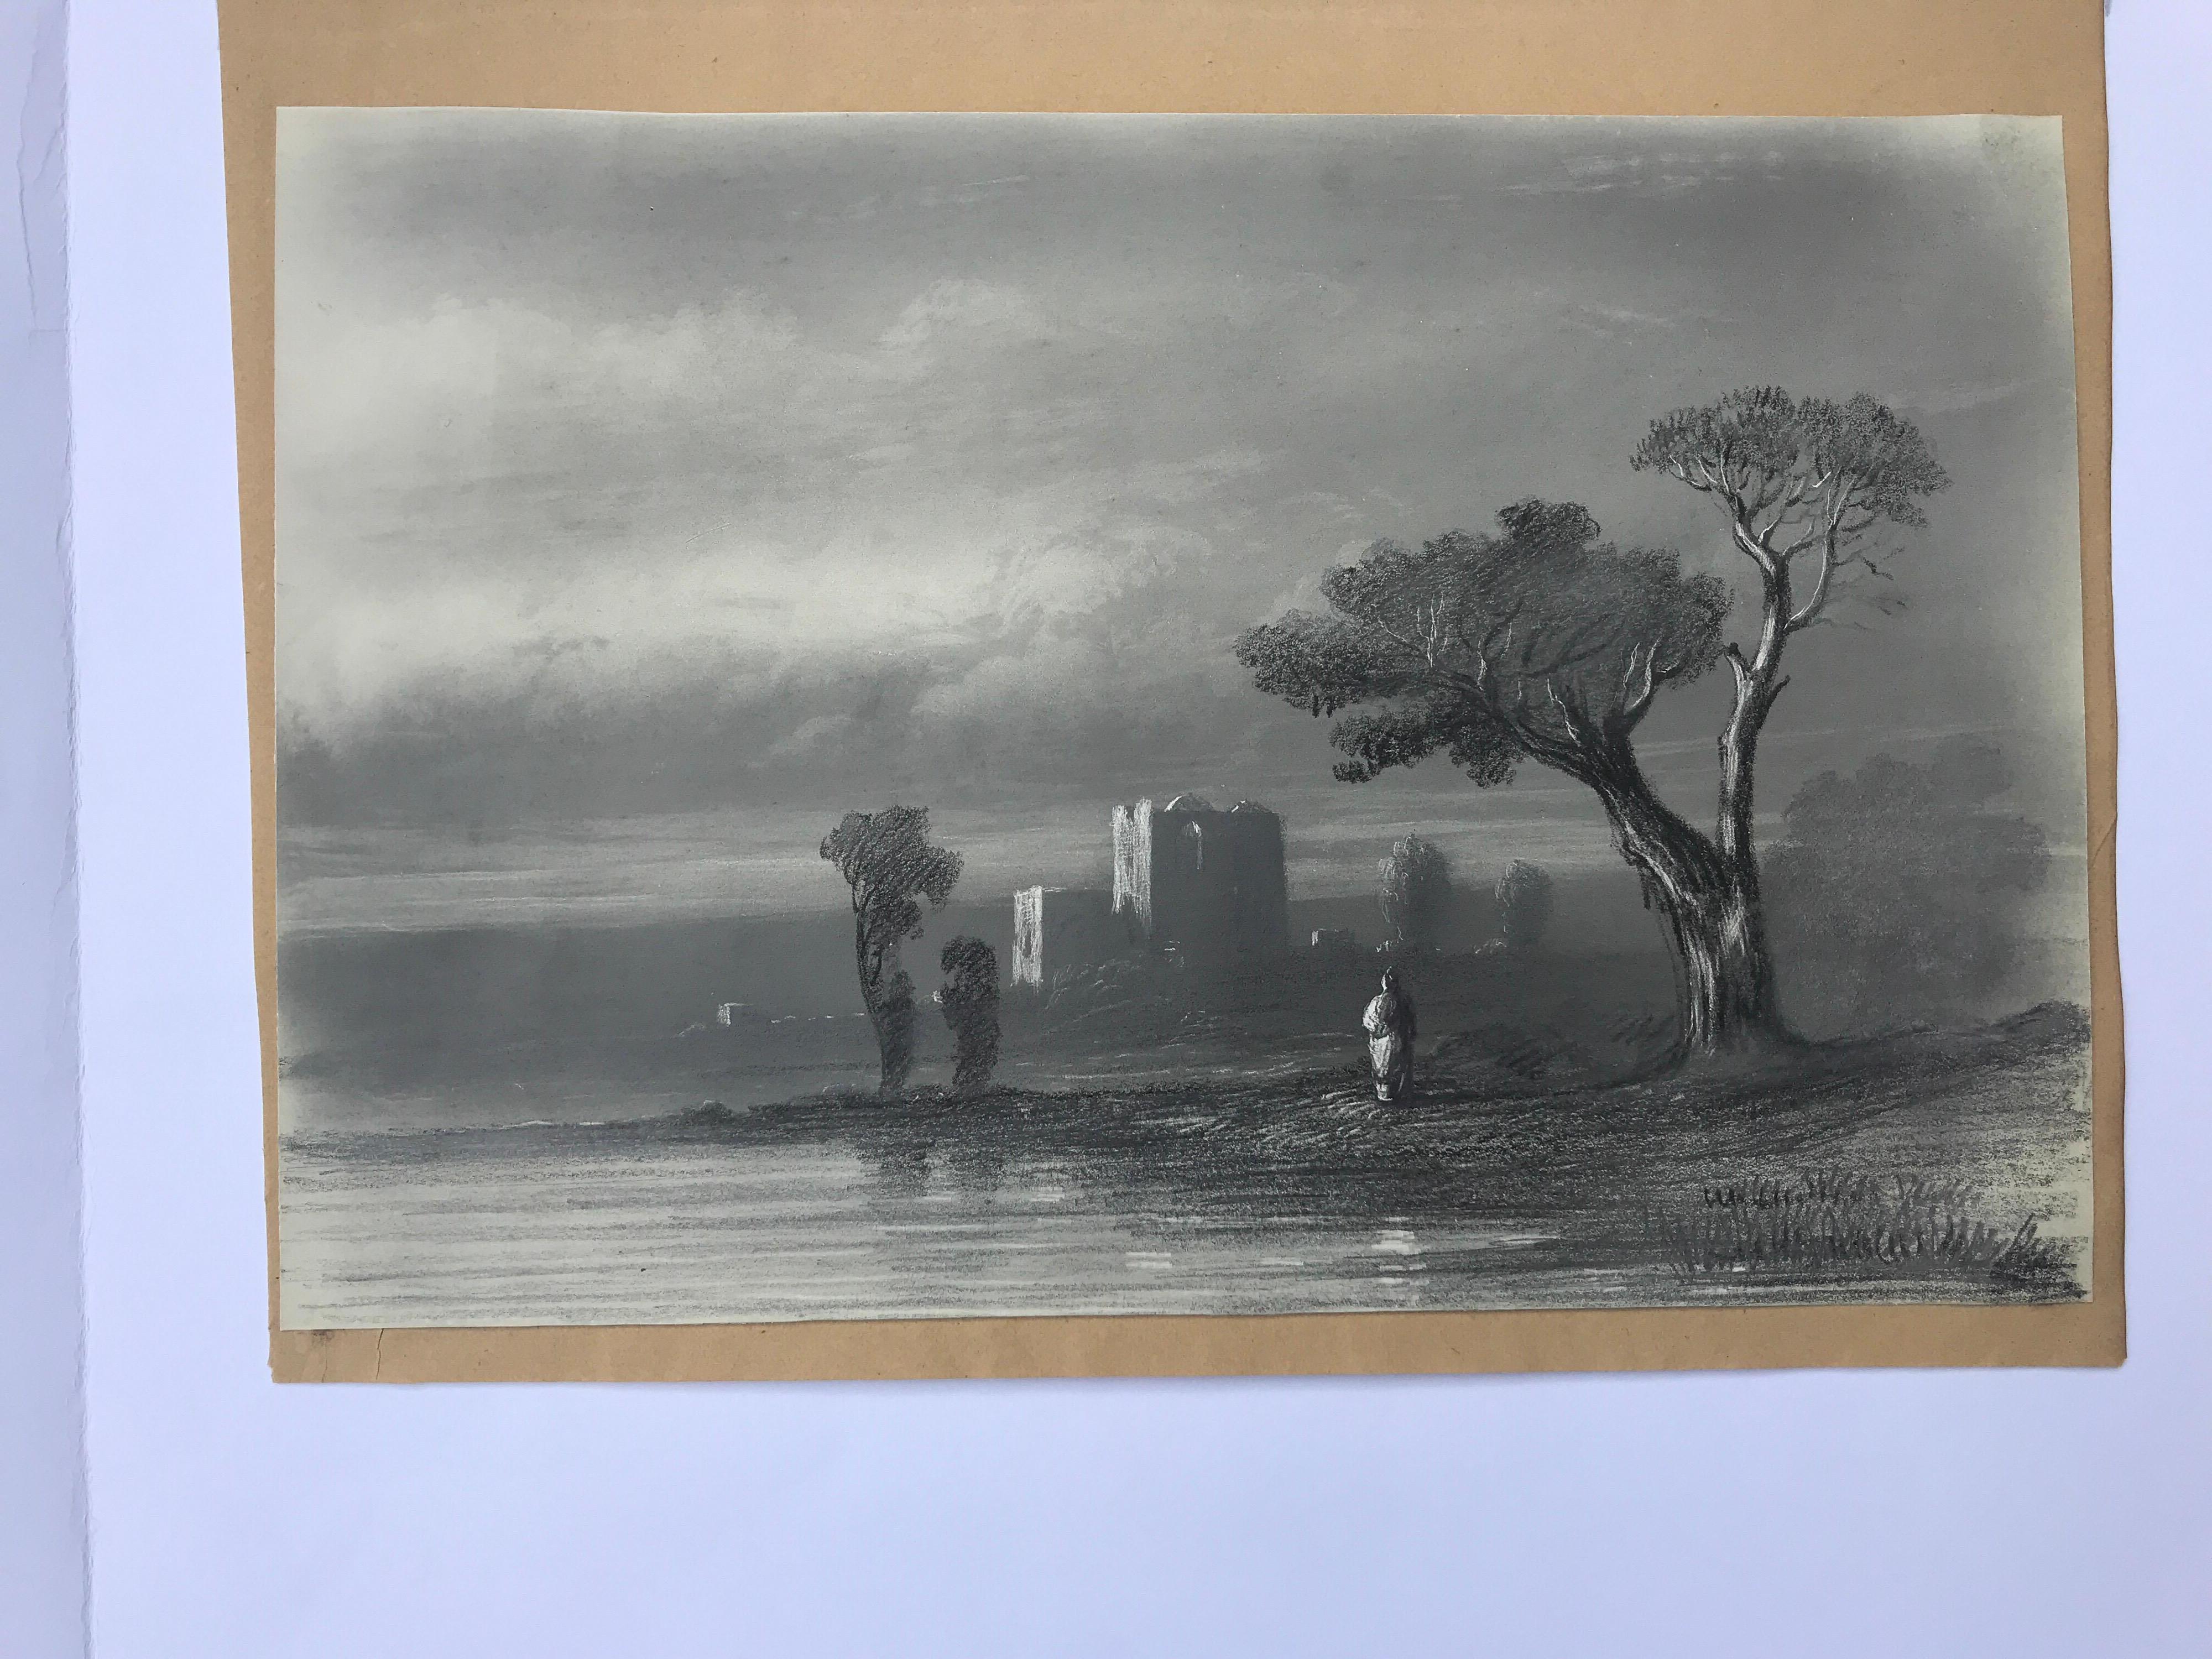 This original orientalist landscape drawing on paper was created by French artist Juste Fruchard in the mid 19th century. Featuring a grisaille technique, the drawing depicts a theme dear to 19th century artists: orientalism. The invasion of Egypt